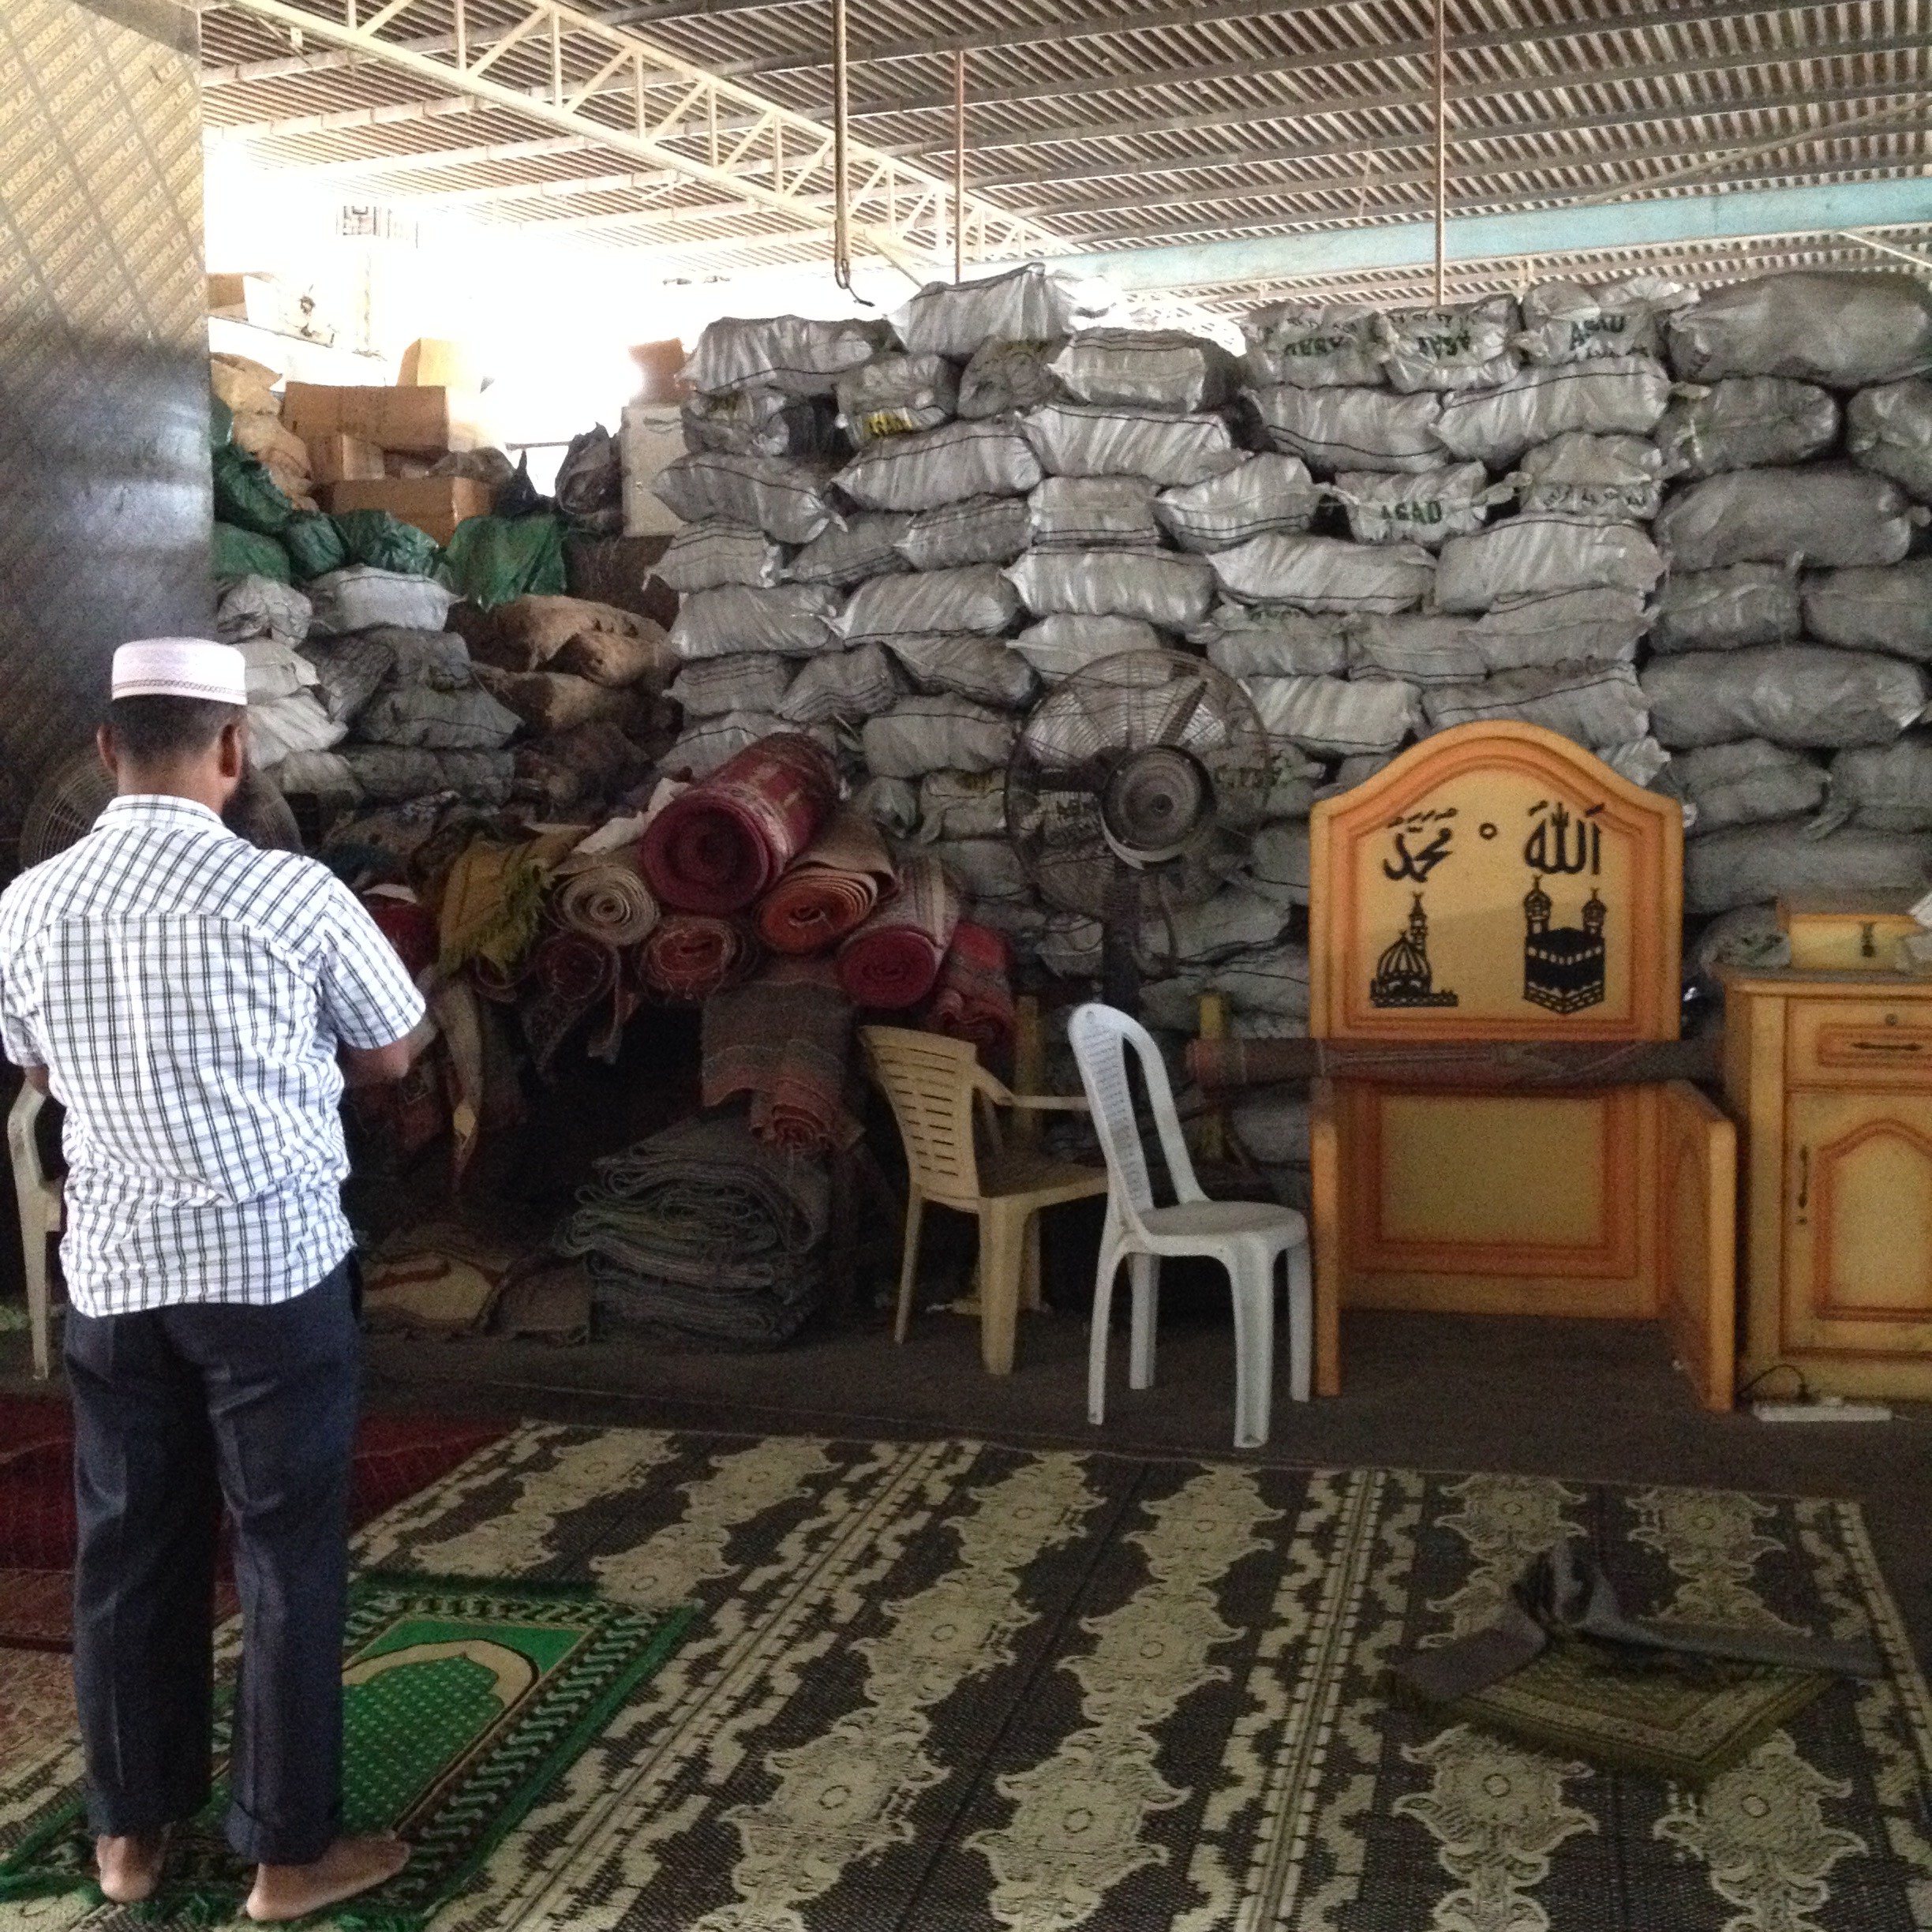 The five daily prayers are sometimes the only breaks that workers gets off work. In this picture, we see a praying space set up at the workplace.